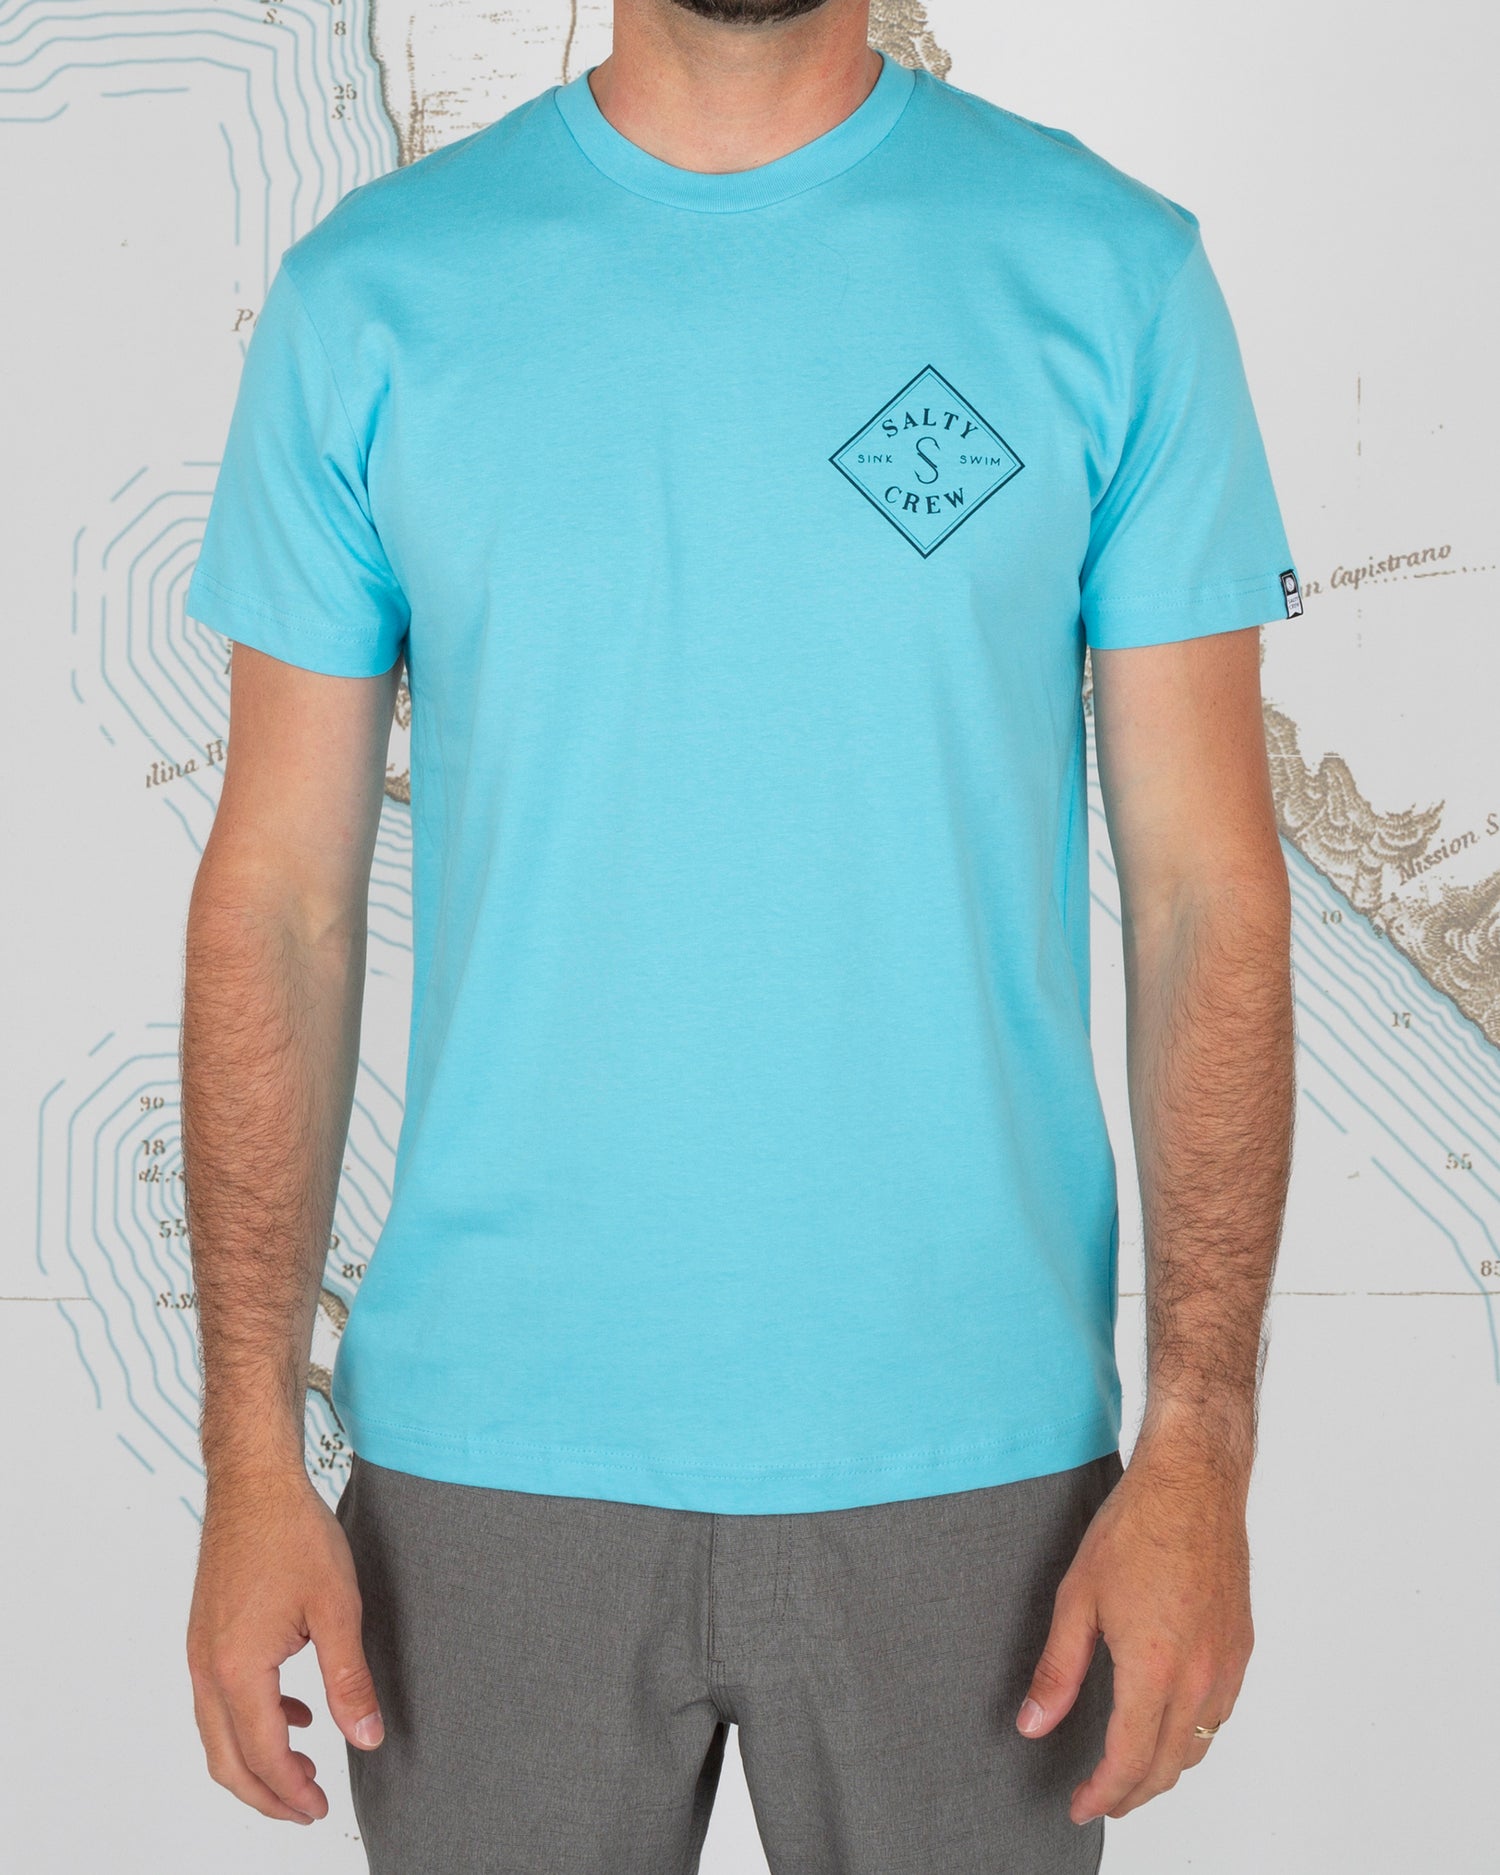 On body front of Tippet Pacific Blue Premium S/S Tee